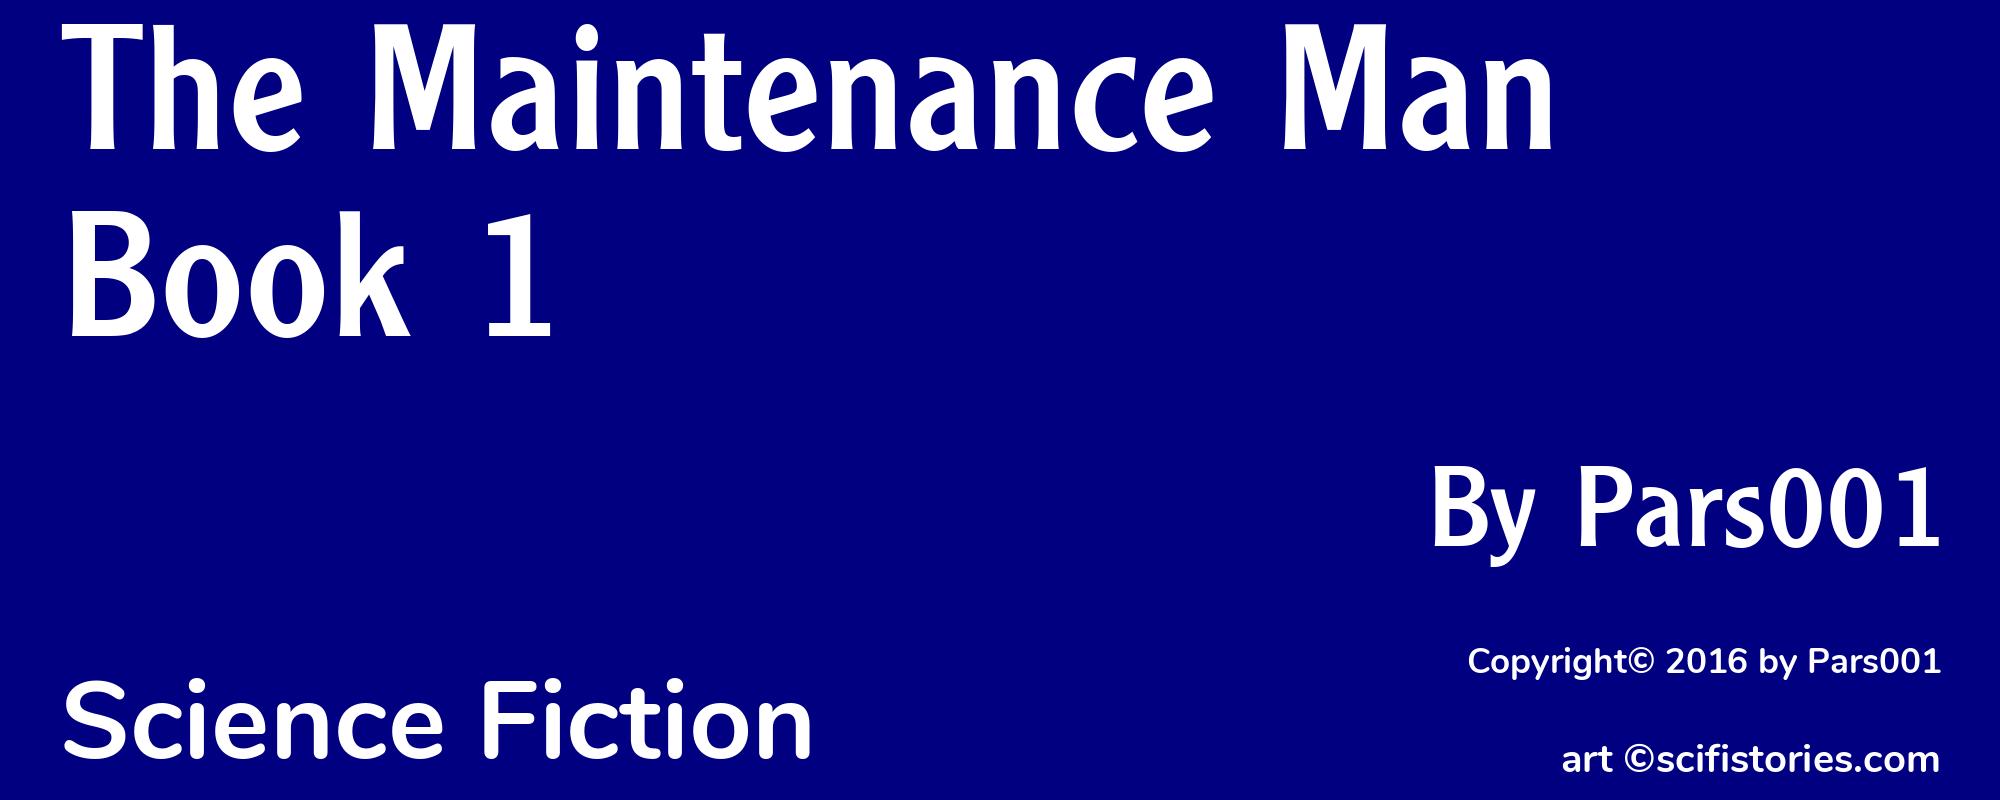 The Maintenance Man Book 1 - Cover